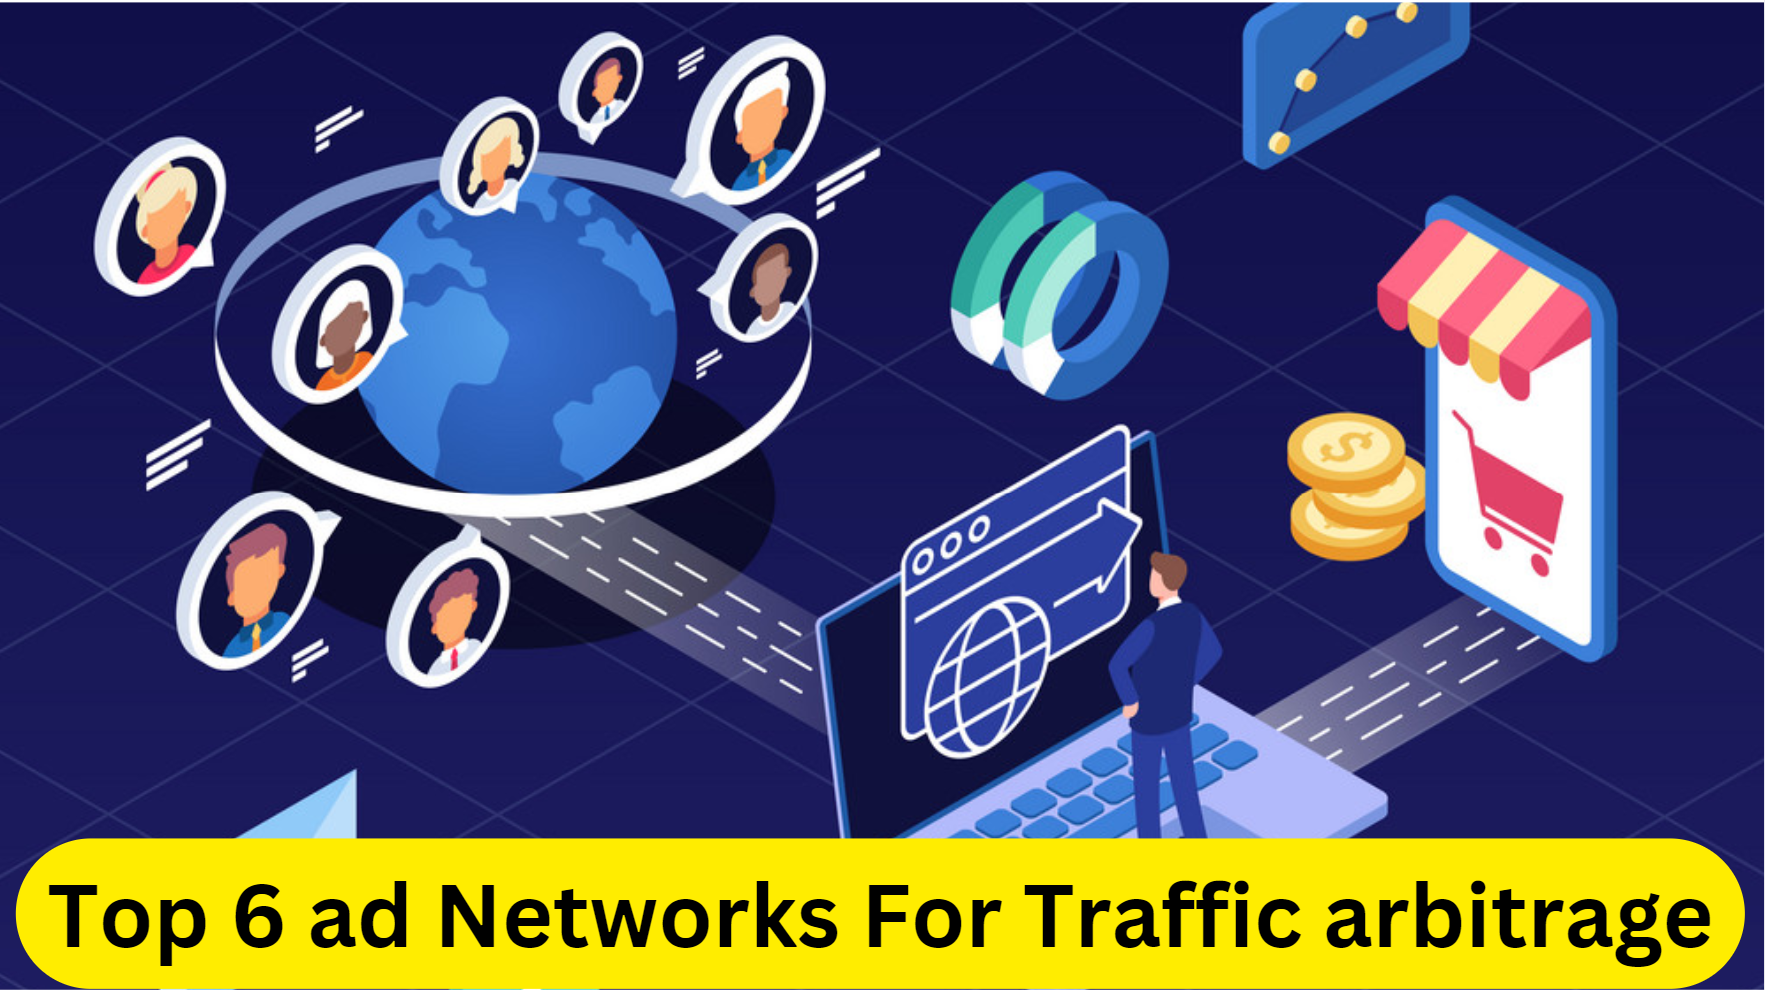 Top 6 ad Networks For Traffic arbitrage | Cheap Traffic